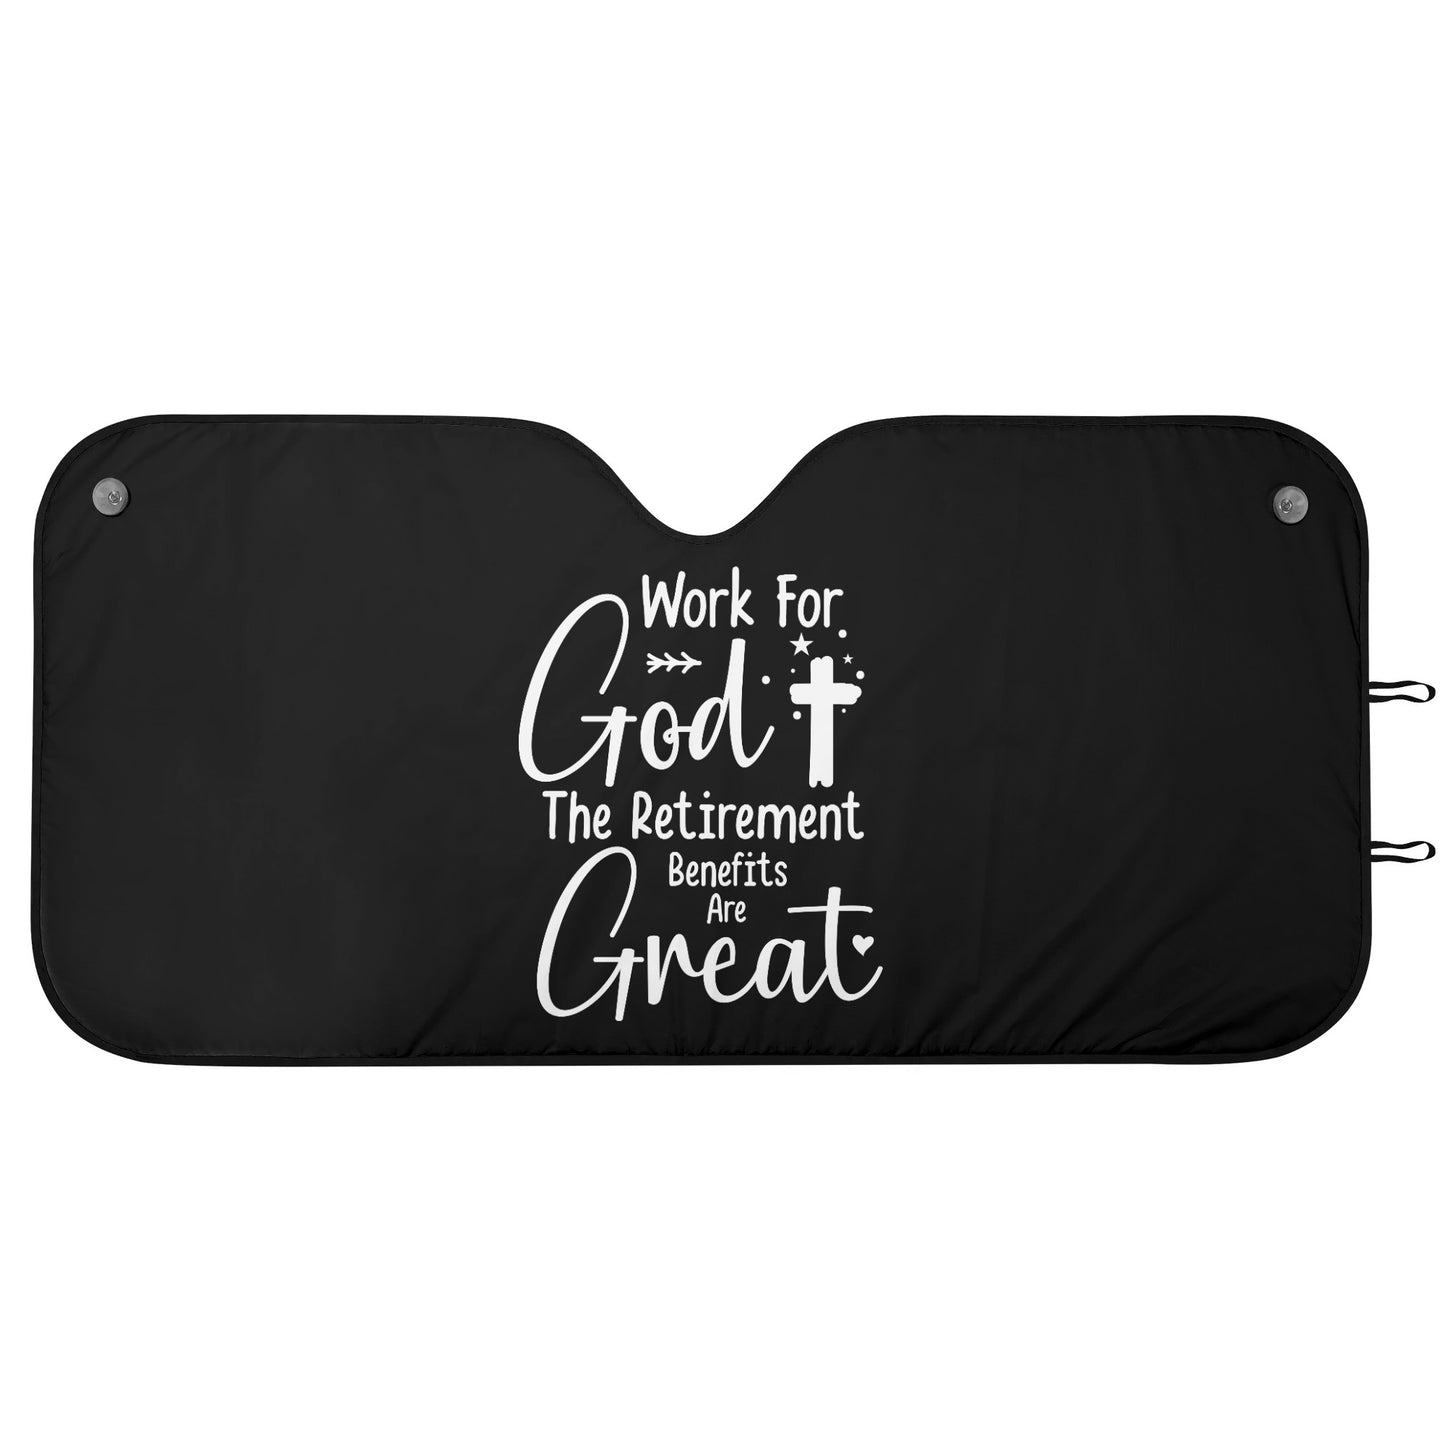 Work For God The Retirement Benefits Are Great Car Sunshade Christian Car Accessories popcustoms